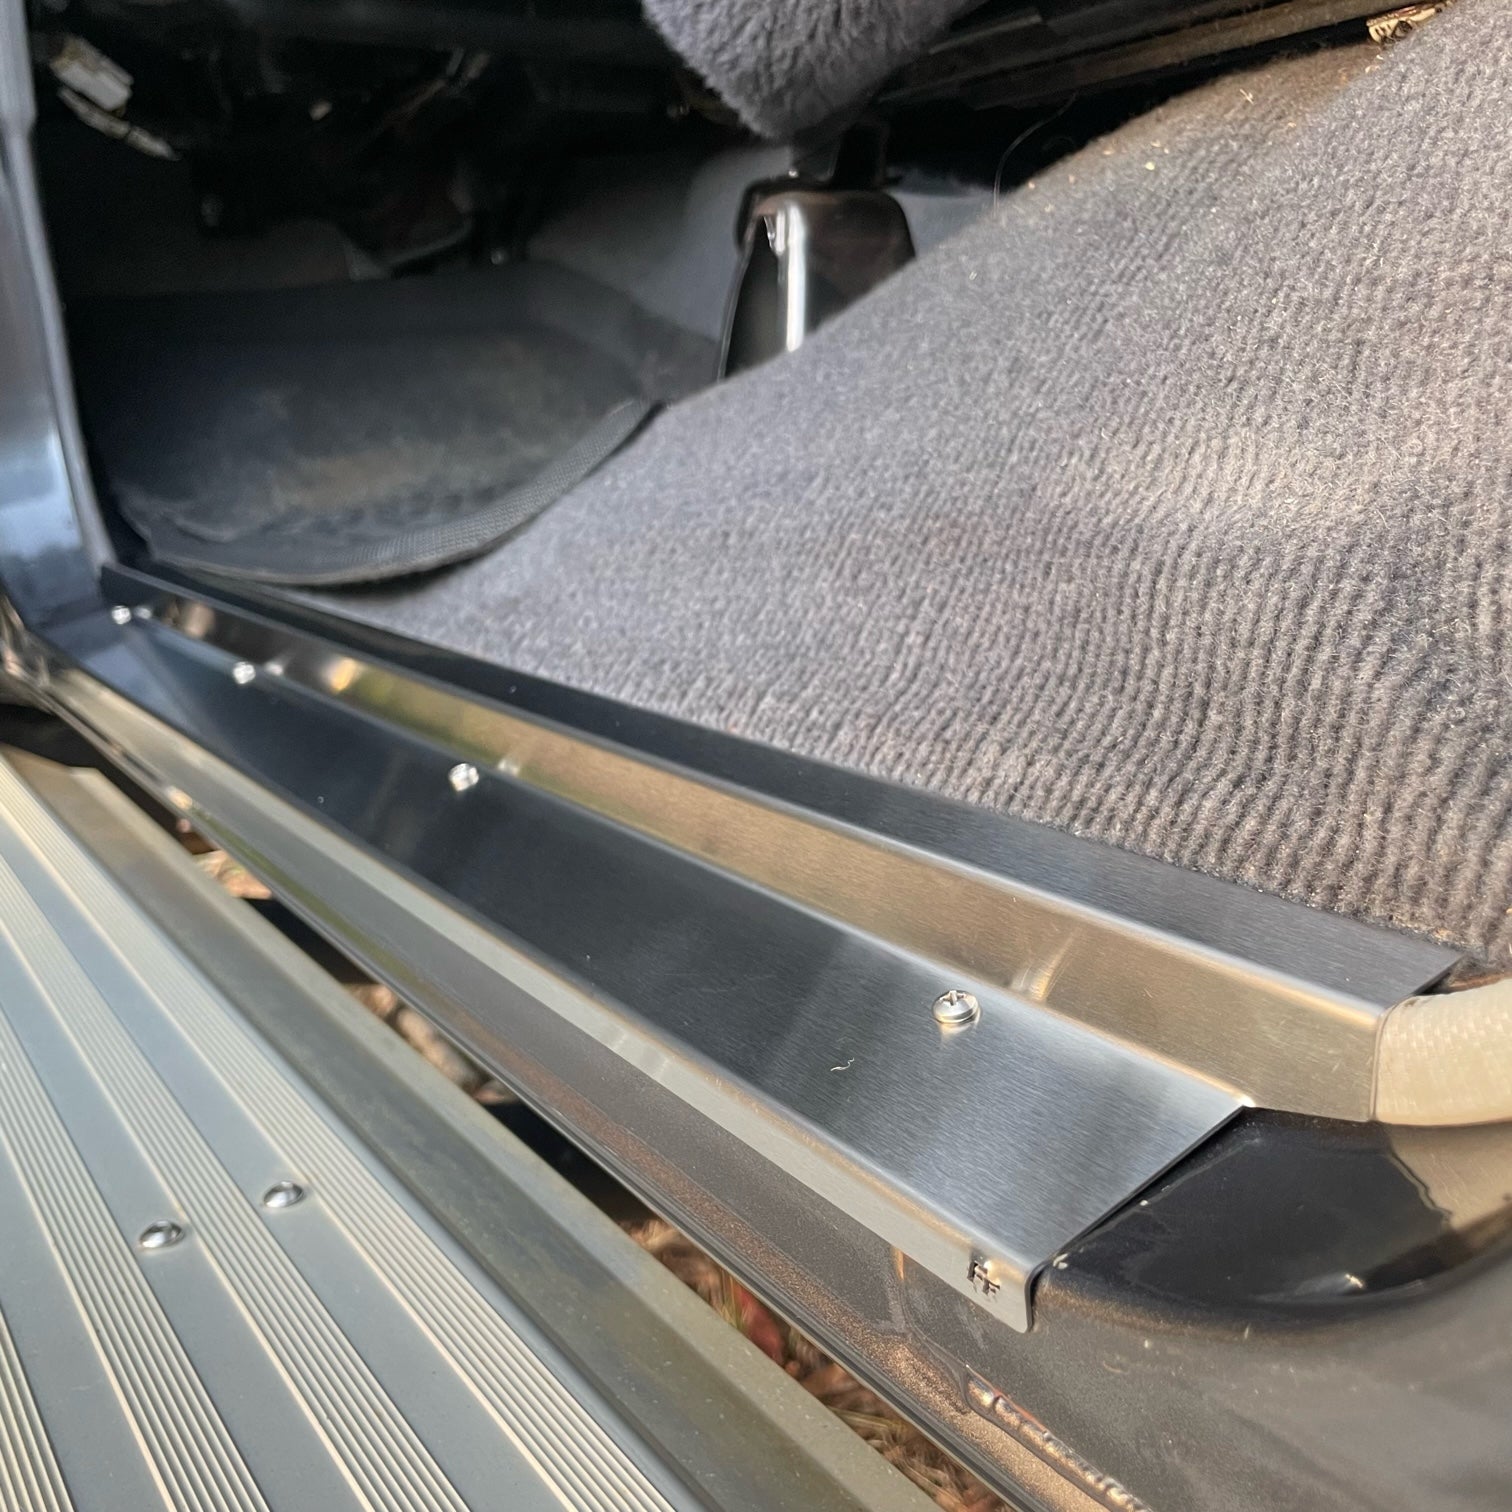 Stainless Steel Sill Trims - Suitable for use with 70 Series LandCruis